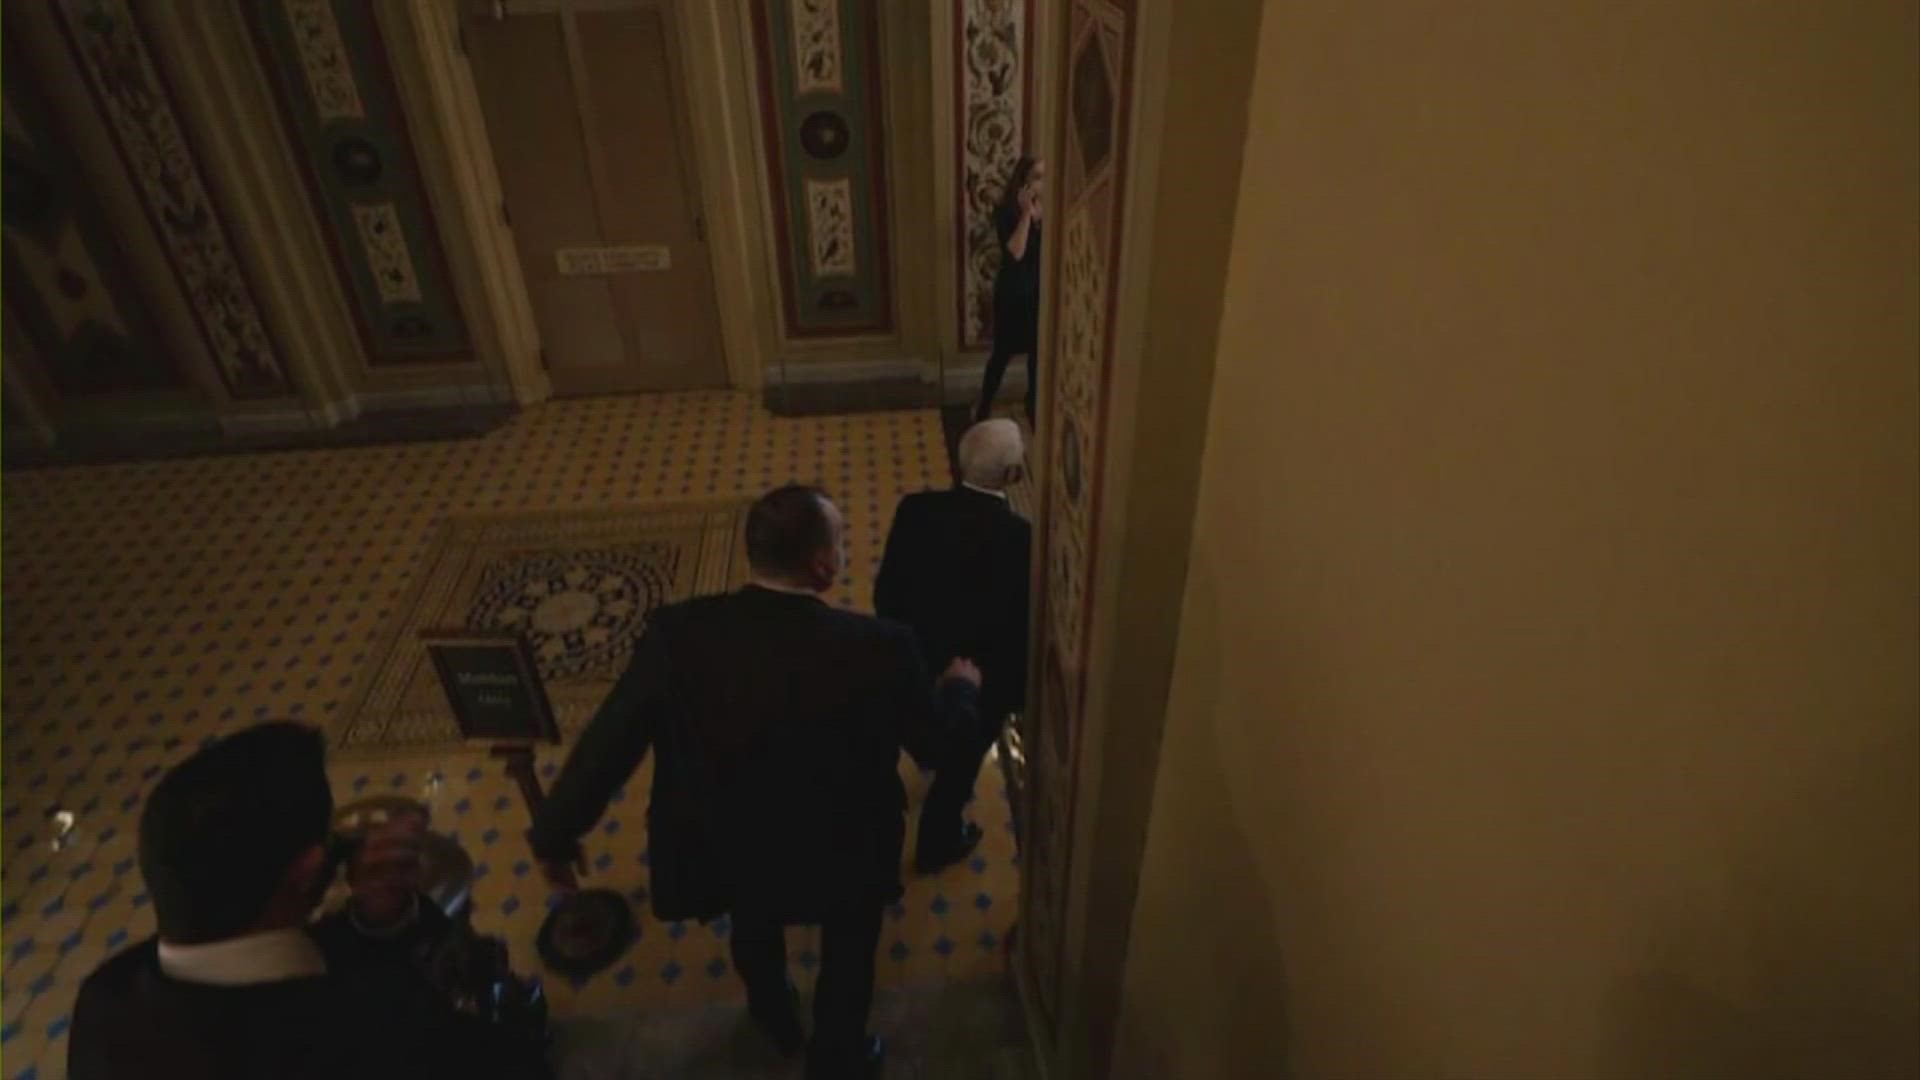 The House committee investigating the Jan. 6 attack on the US Capitol says the mob was just 40 feet from Mike Pence at one point, highlighting danger to his life.